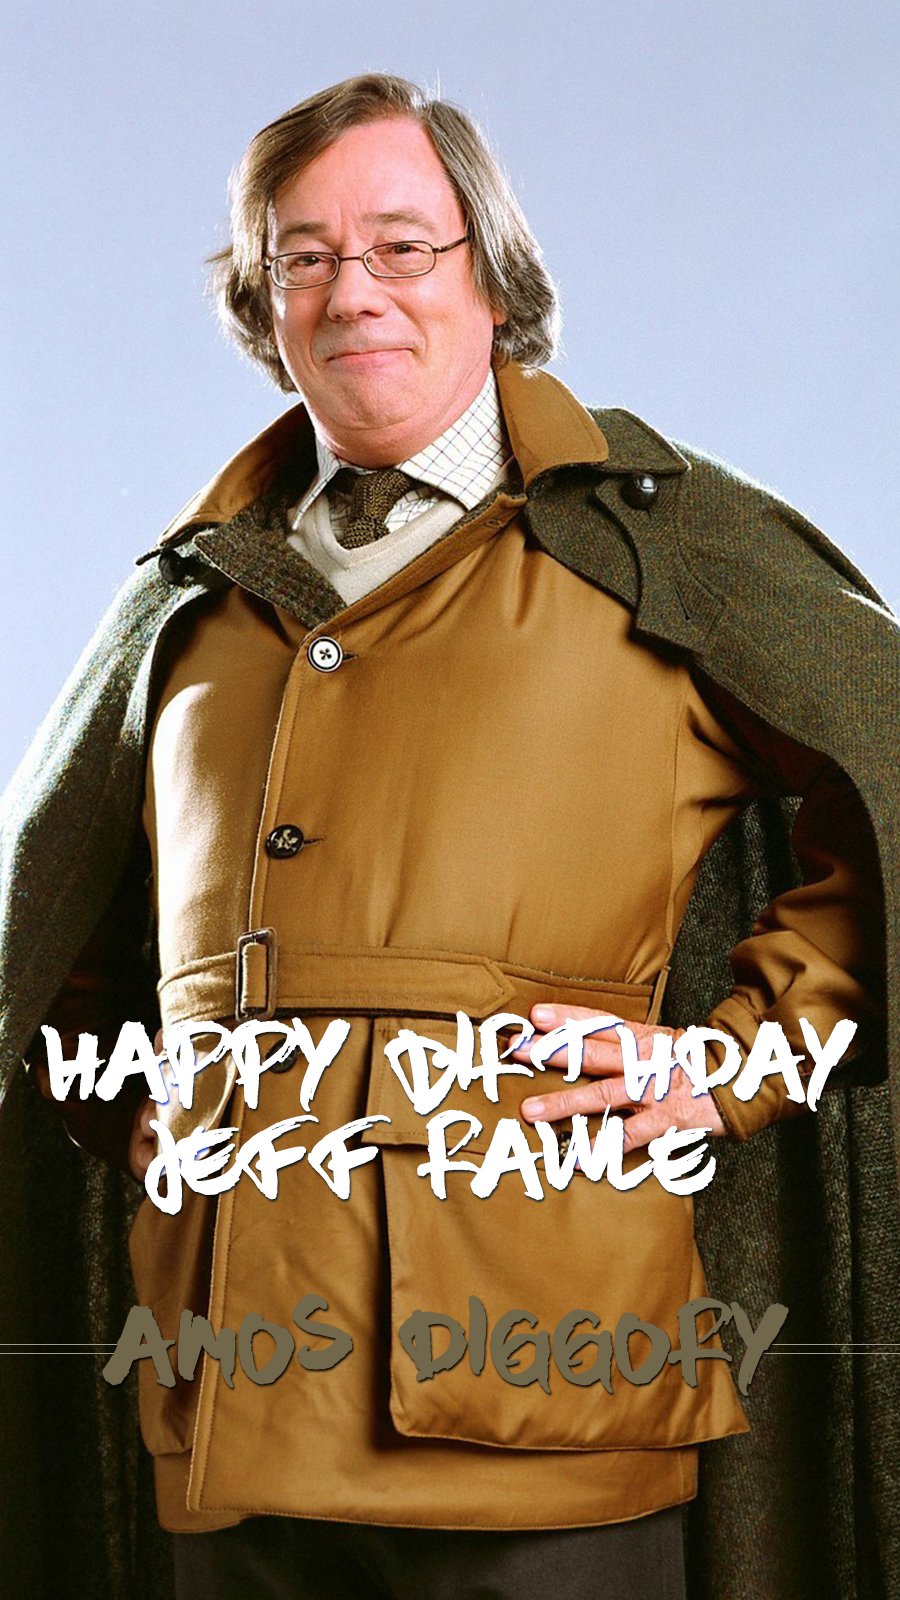 Happy Birthday, Jeff Rawle! He played Amos Diggory in Harry Potter and the Goblet of Fire. 